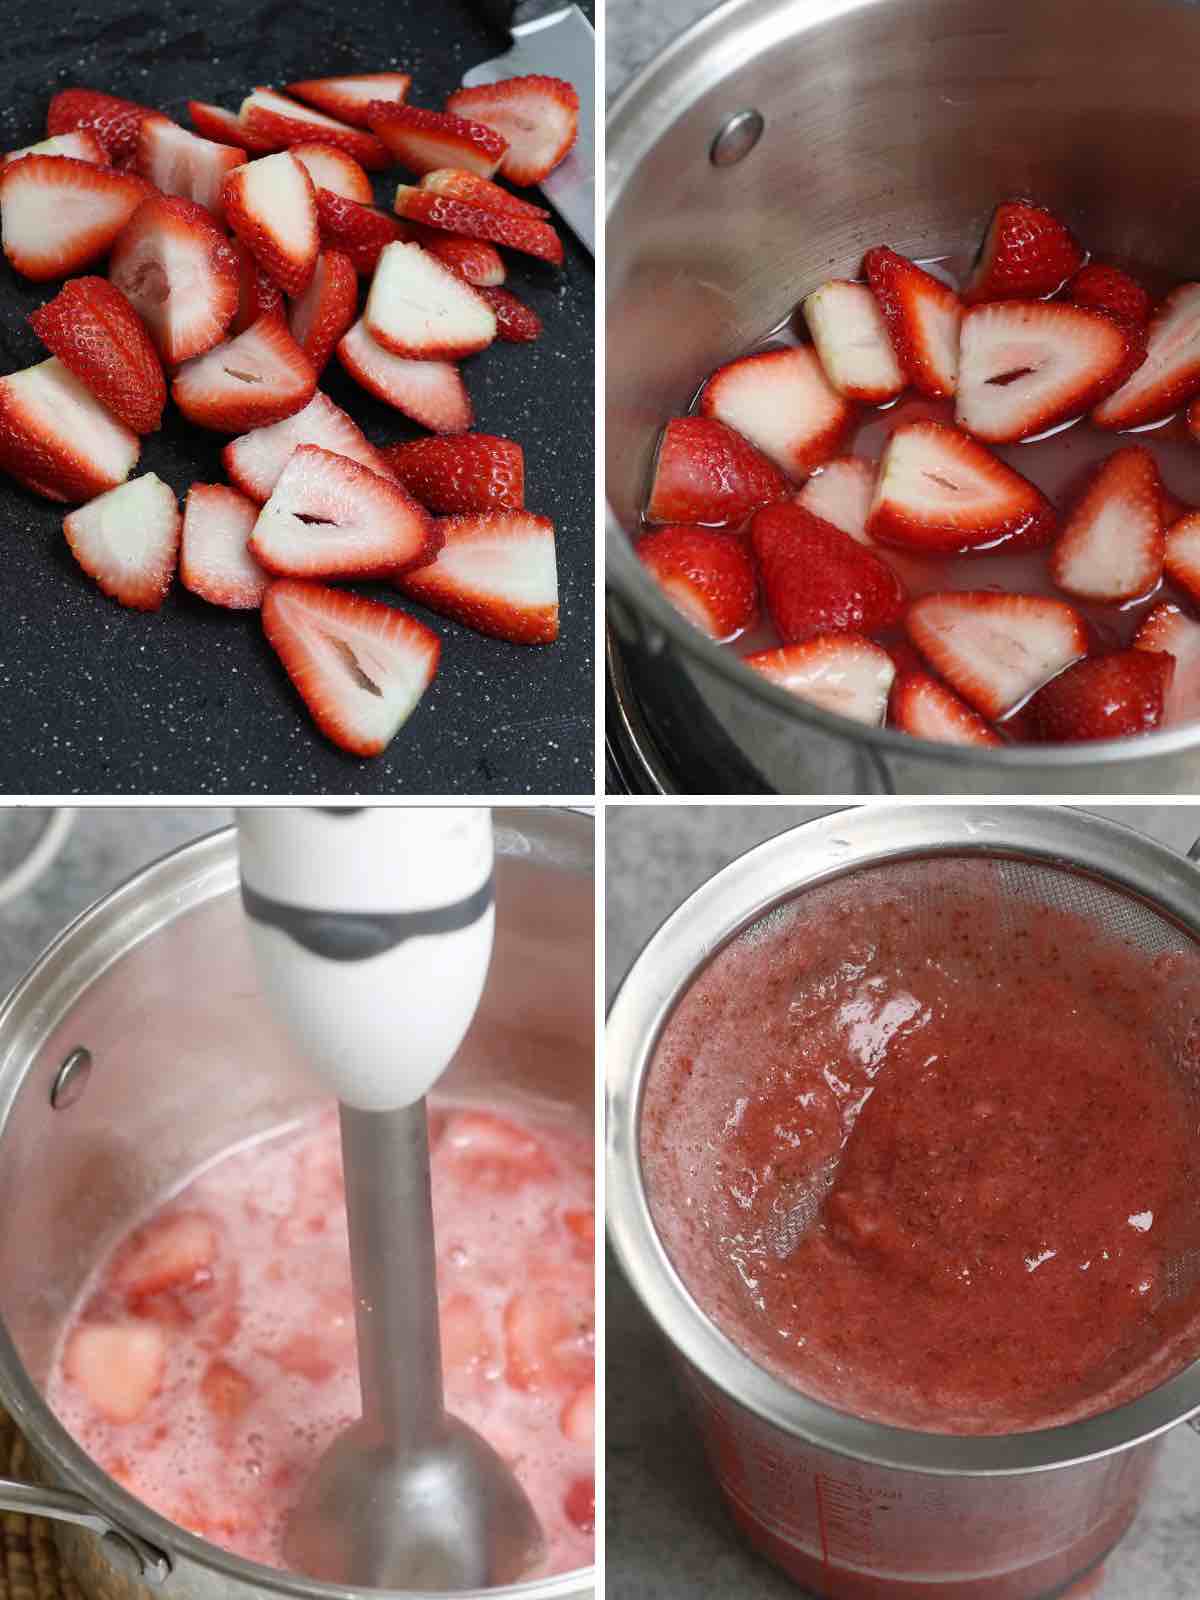 Strawberry Hennessy Recipe Step 1 photo collage.